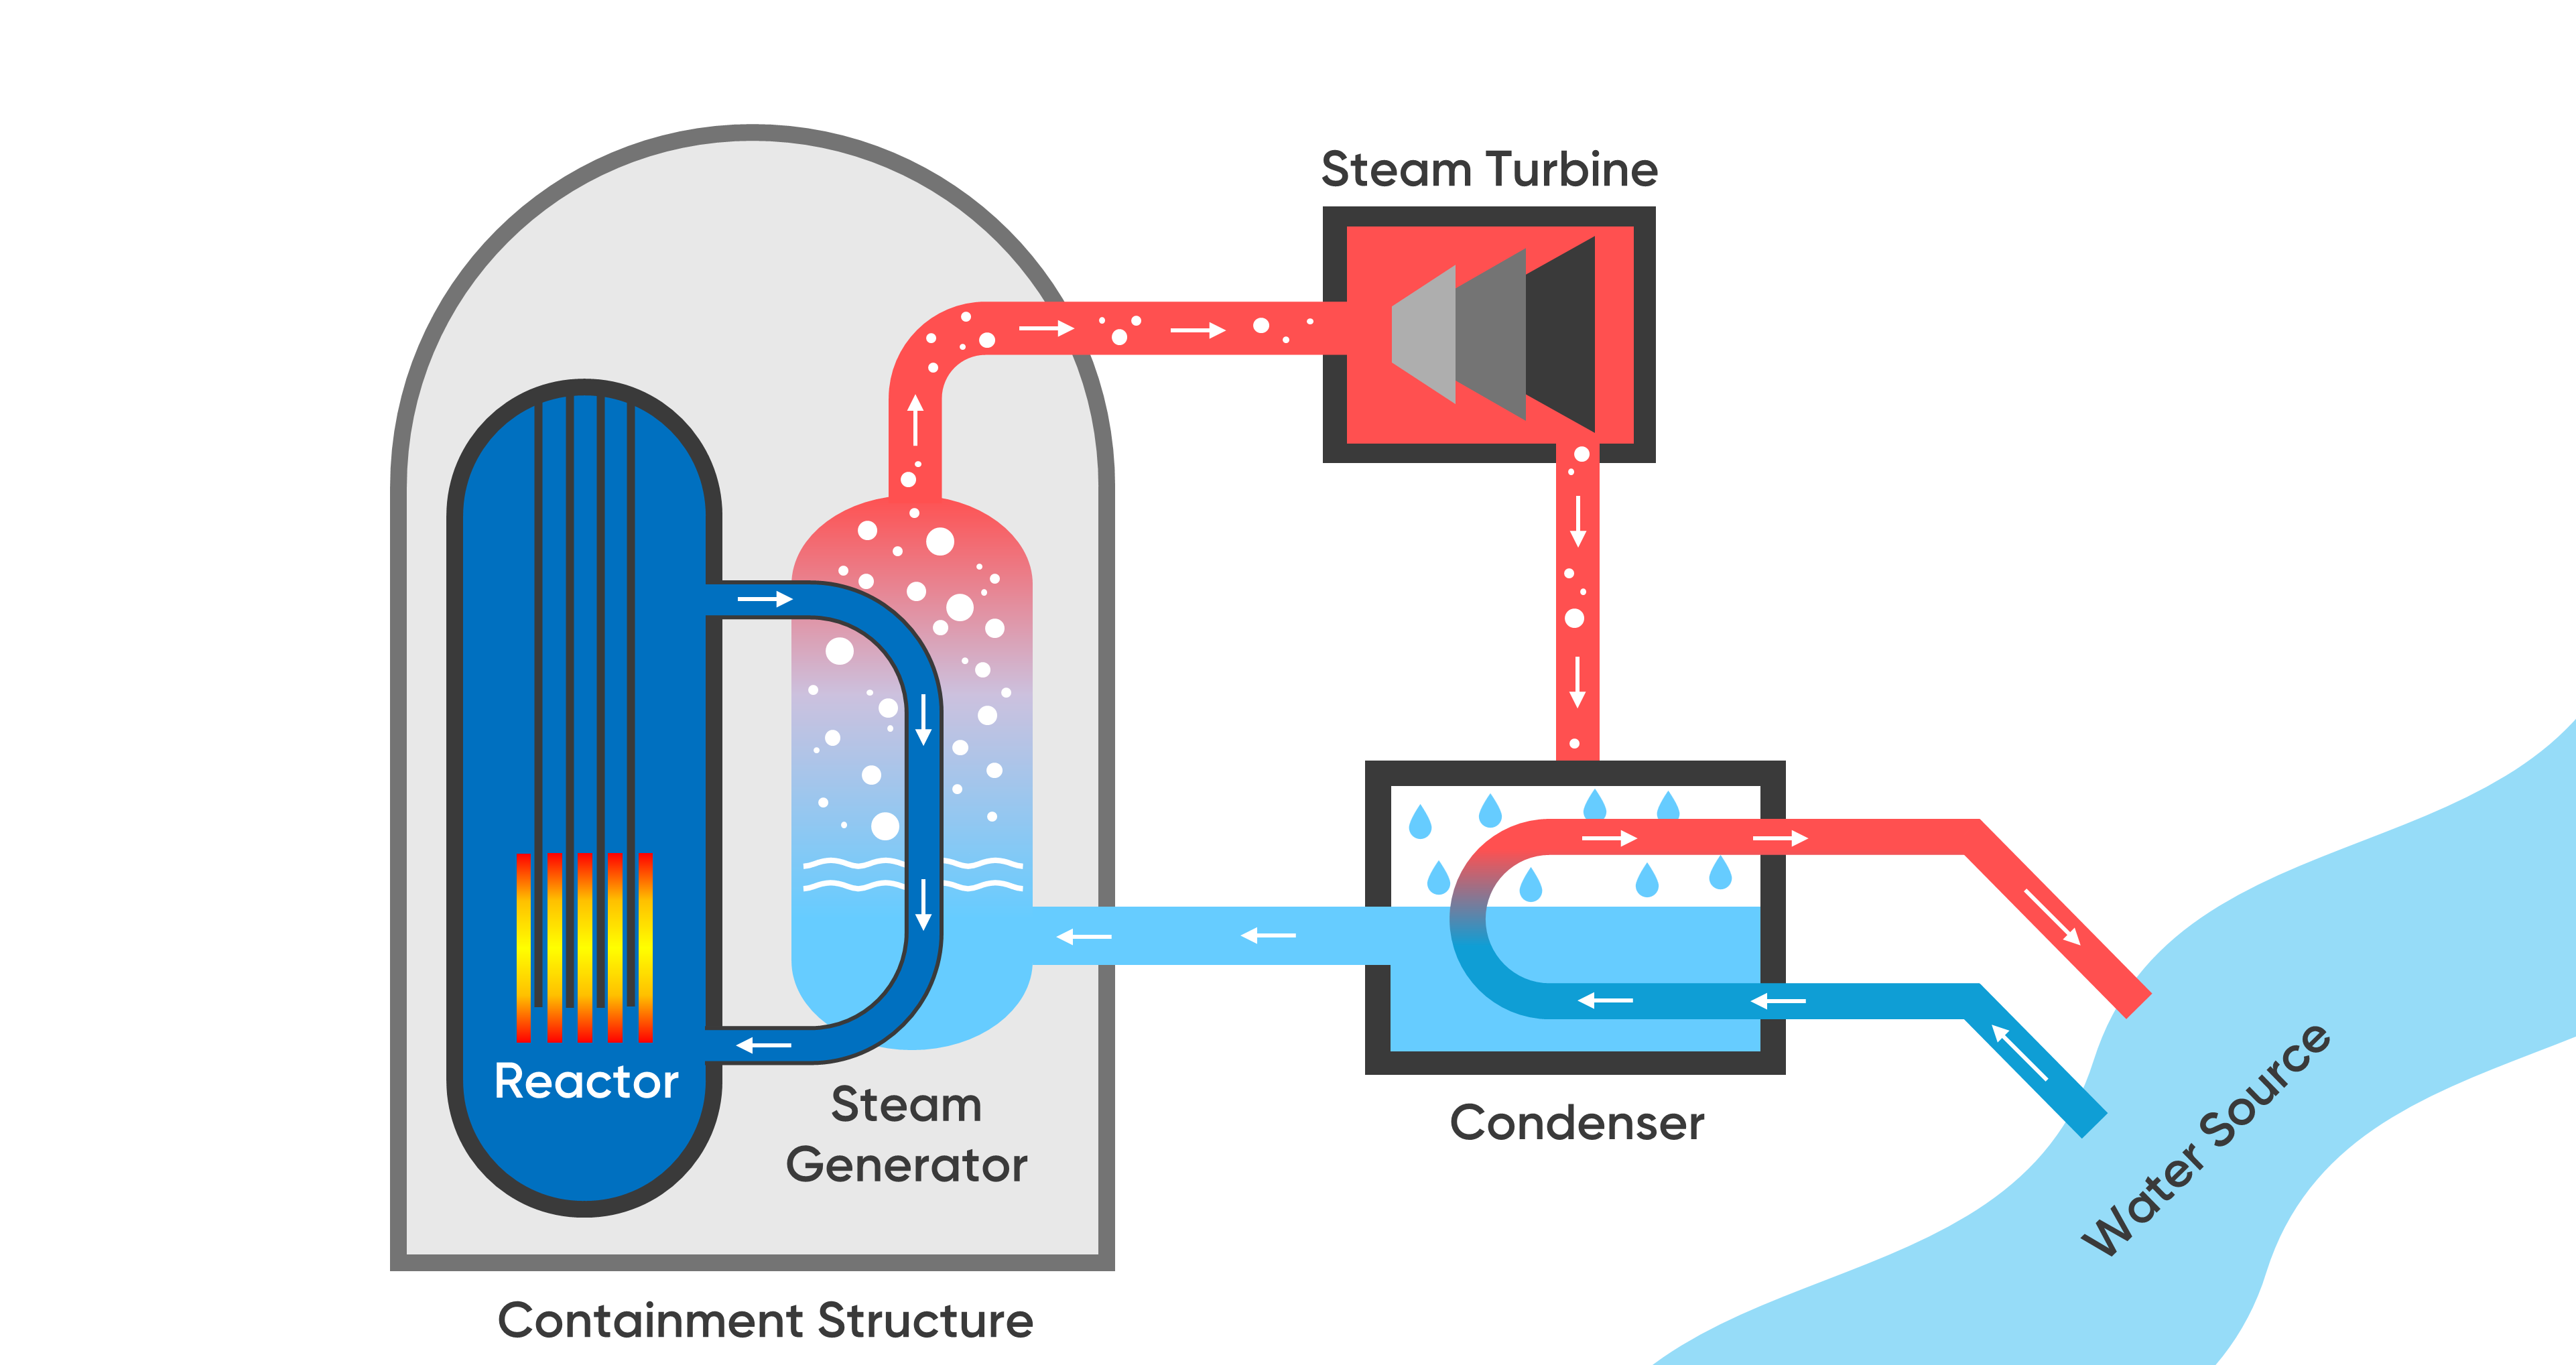 A diagram of a once-through cooling system